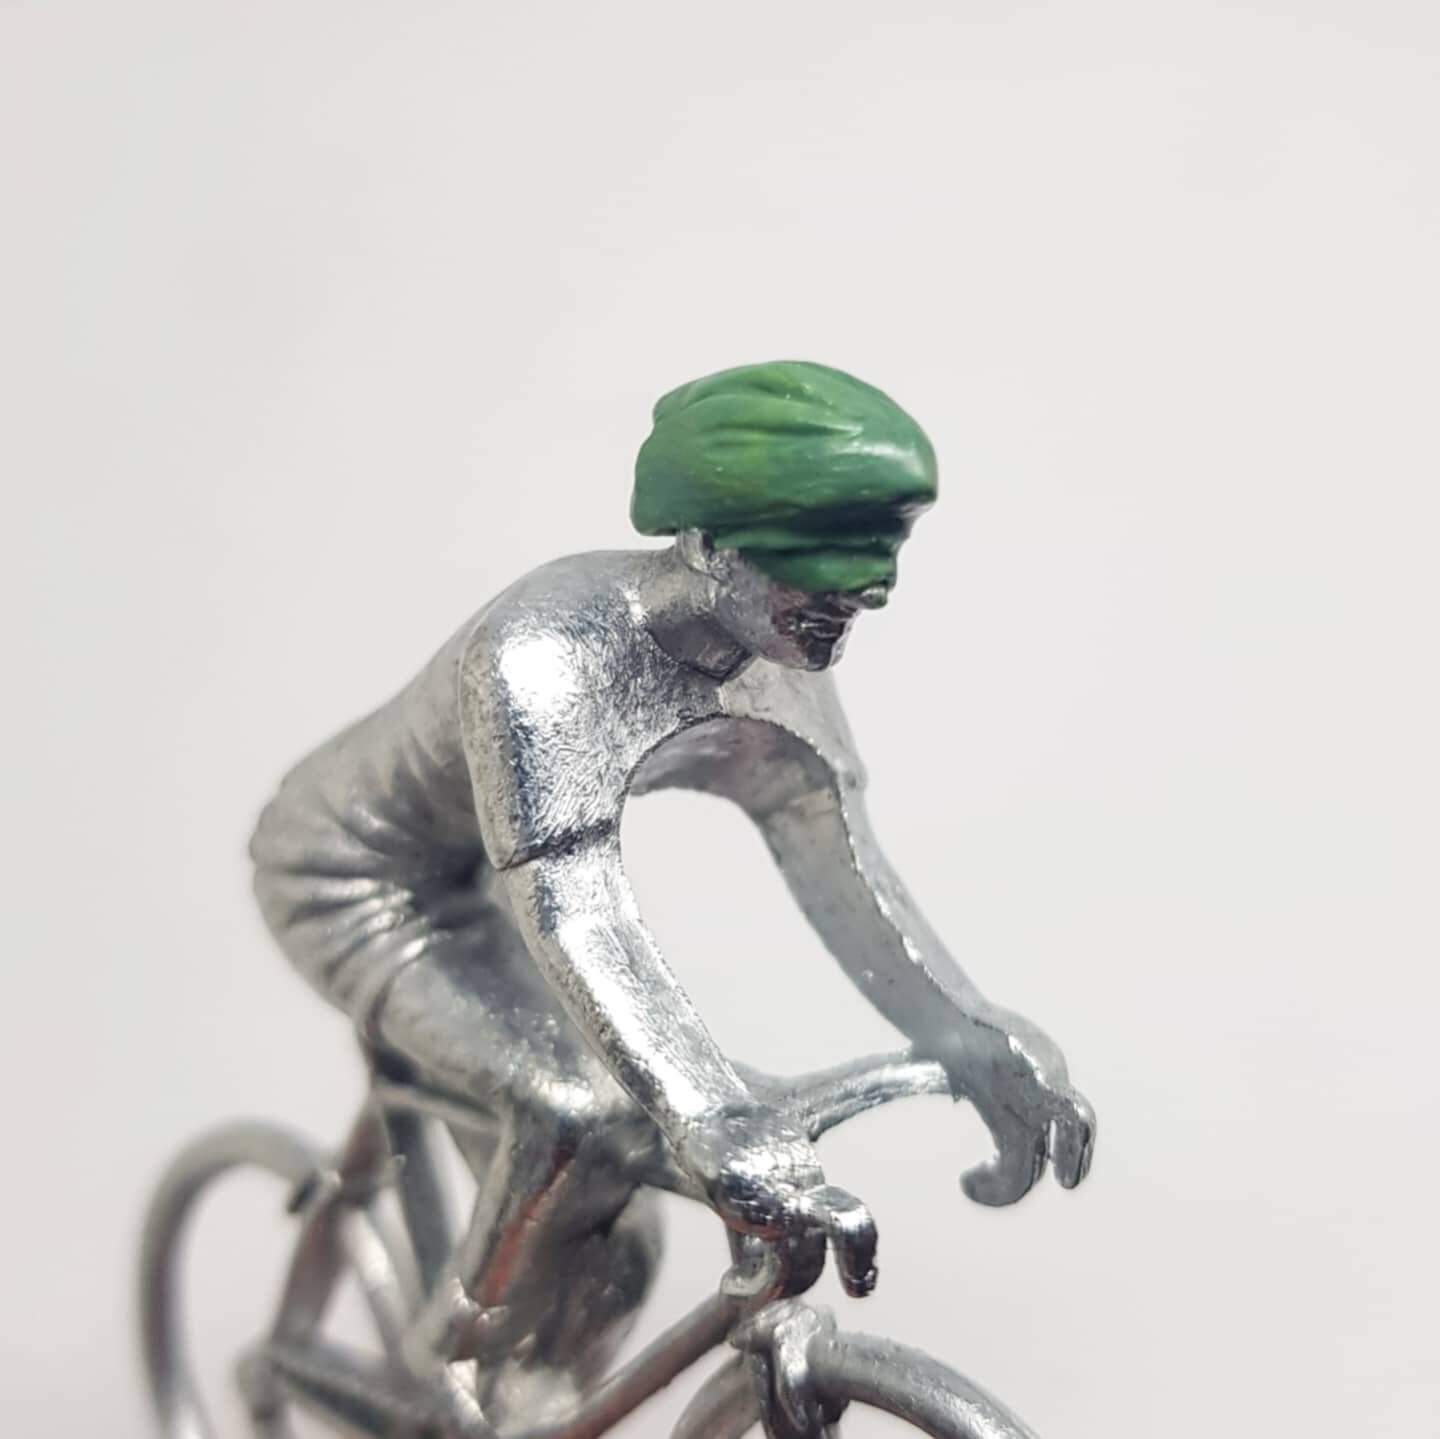 Hope you are all enjoying the tour! I'm working away on some new bespoke Sculpted Cyclists, this option on the webstore gives the option to add extra details to the base Classic model such as; helmets, glasses, trousers, backpacks and more 🙌 What wo